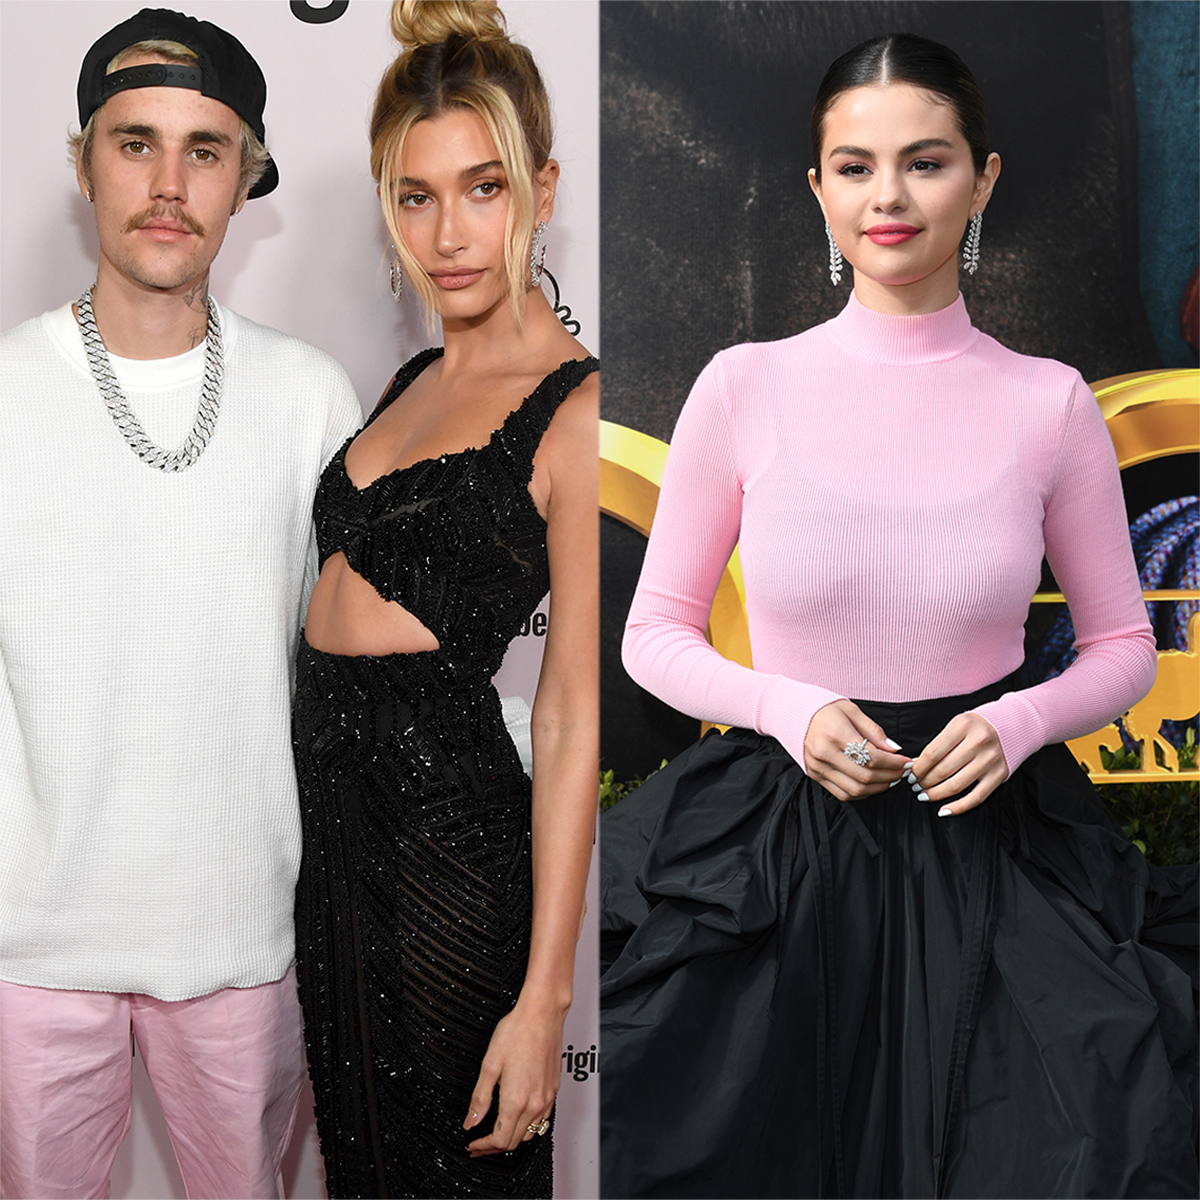 Hailey Bieber On If She Was With Justin Bieber When He Dated Selena Gomez